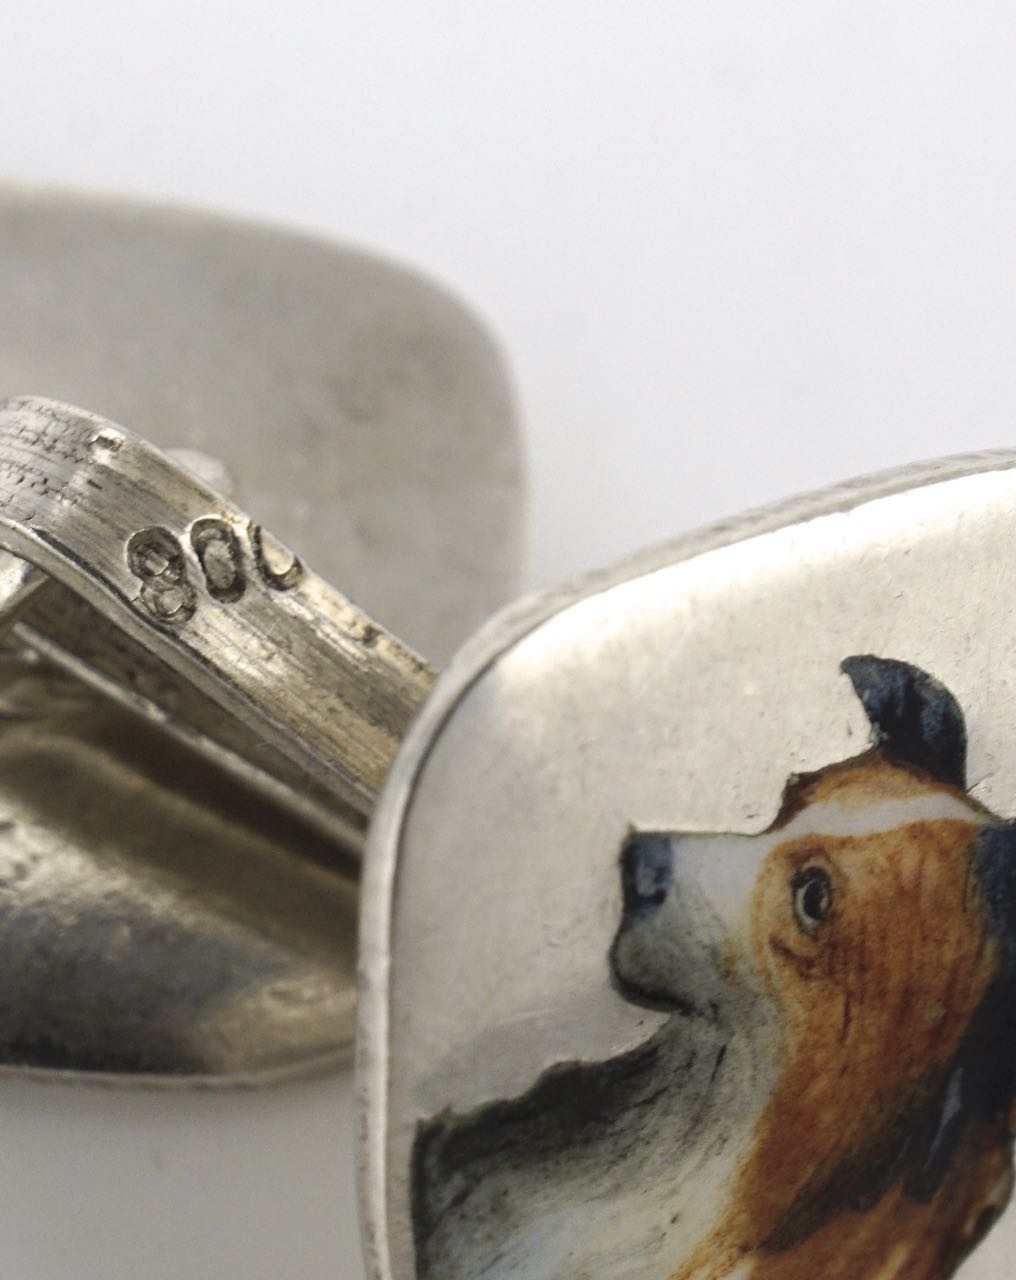 Antique Solid silver double fronted Collie dog enamel cufflinks